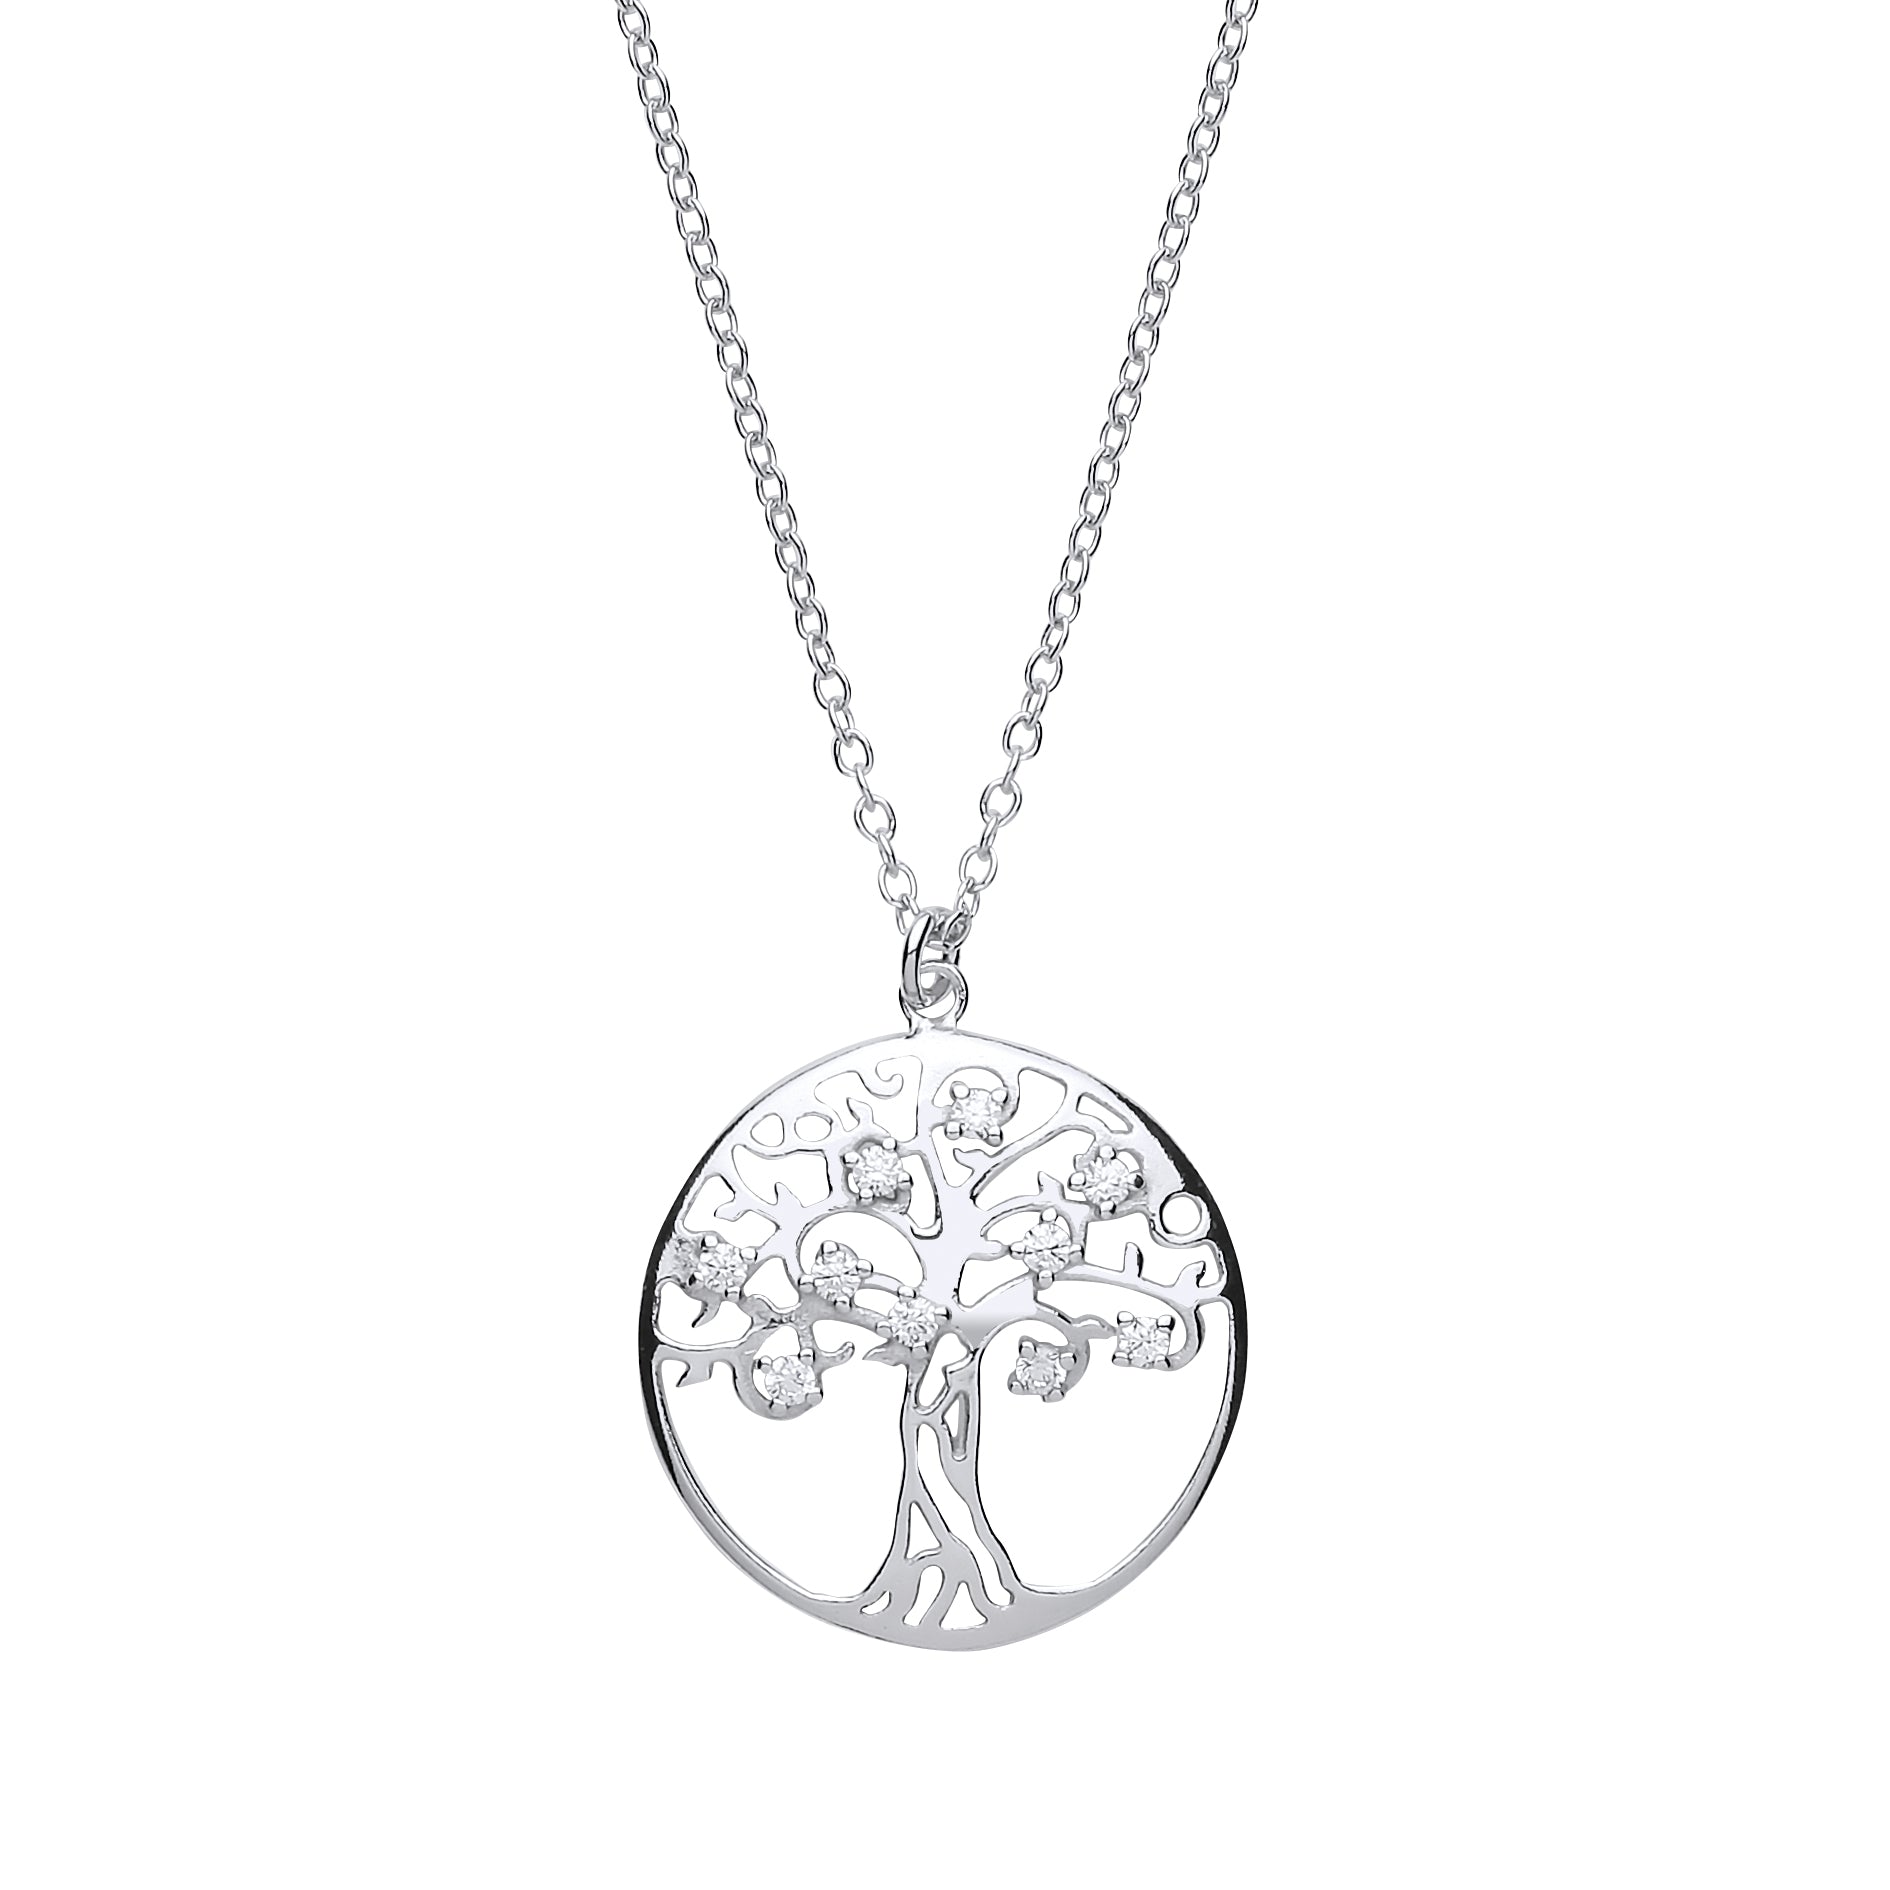 Silver  CZ Tree of Life Charm Necklace 16 inch - GVK196